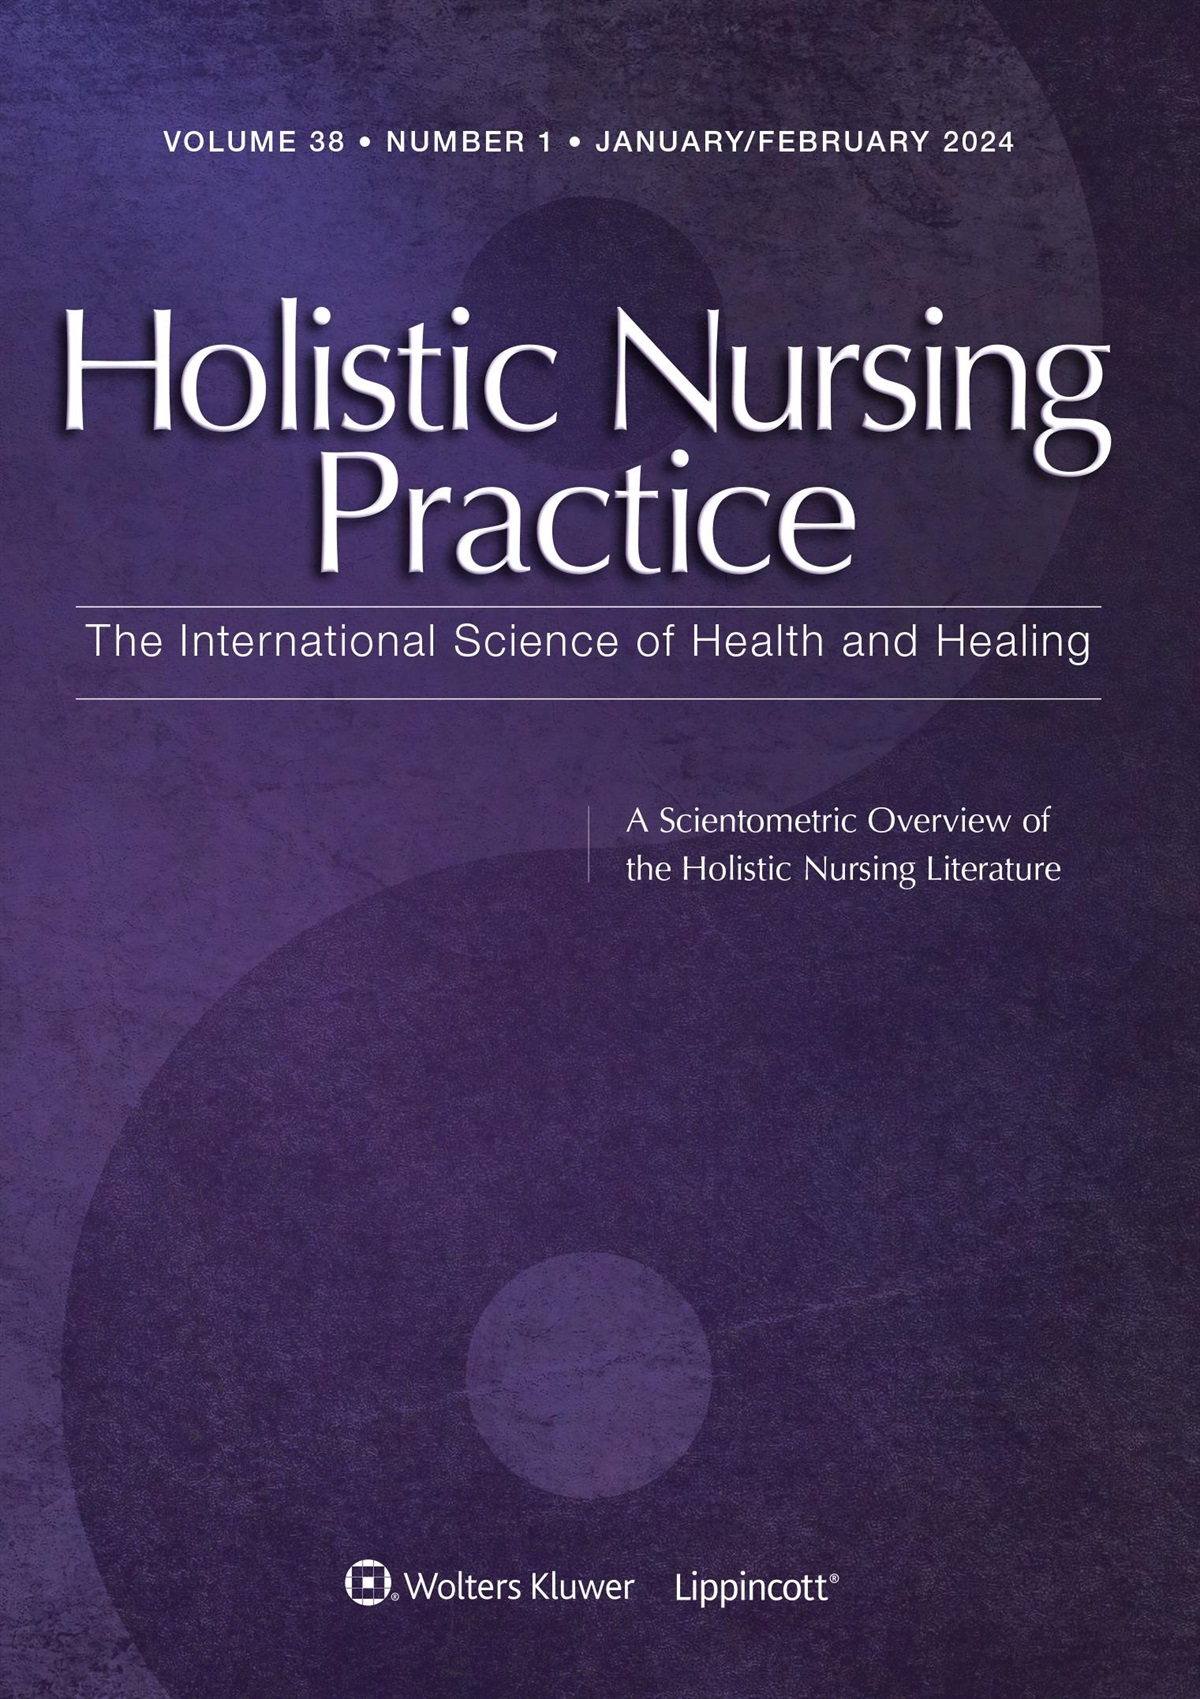 Current-Day Reflections on Nightingale and Nursing History: Examining the Whole